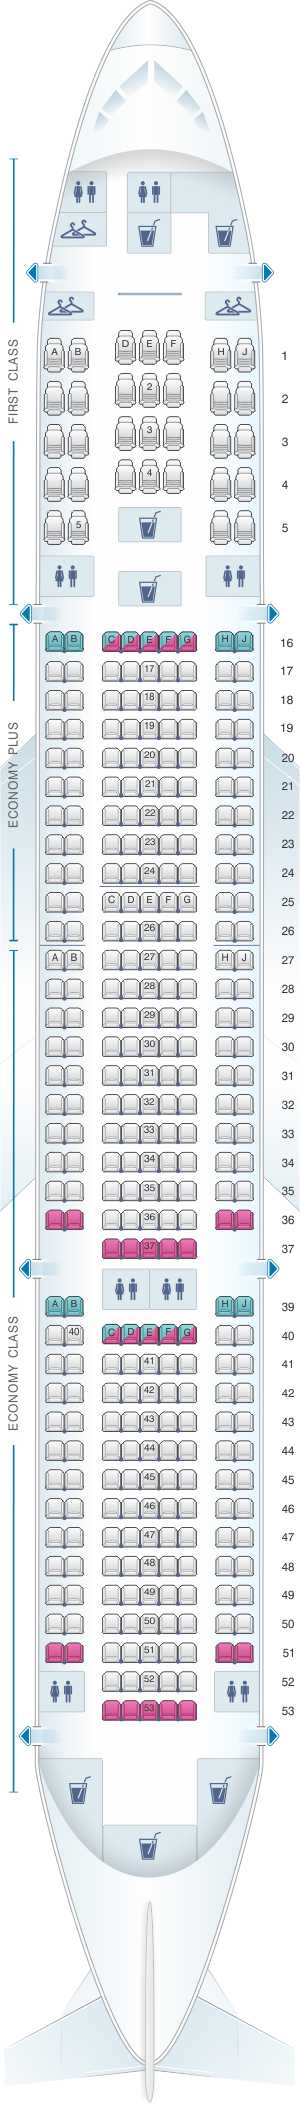 united airlines 777 seat map international